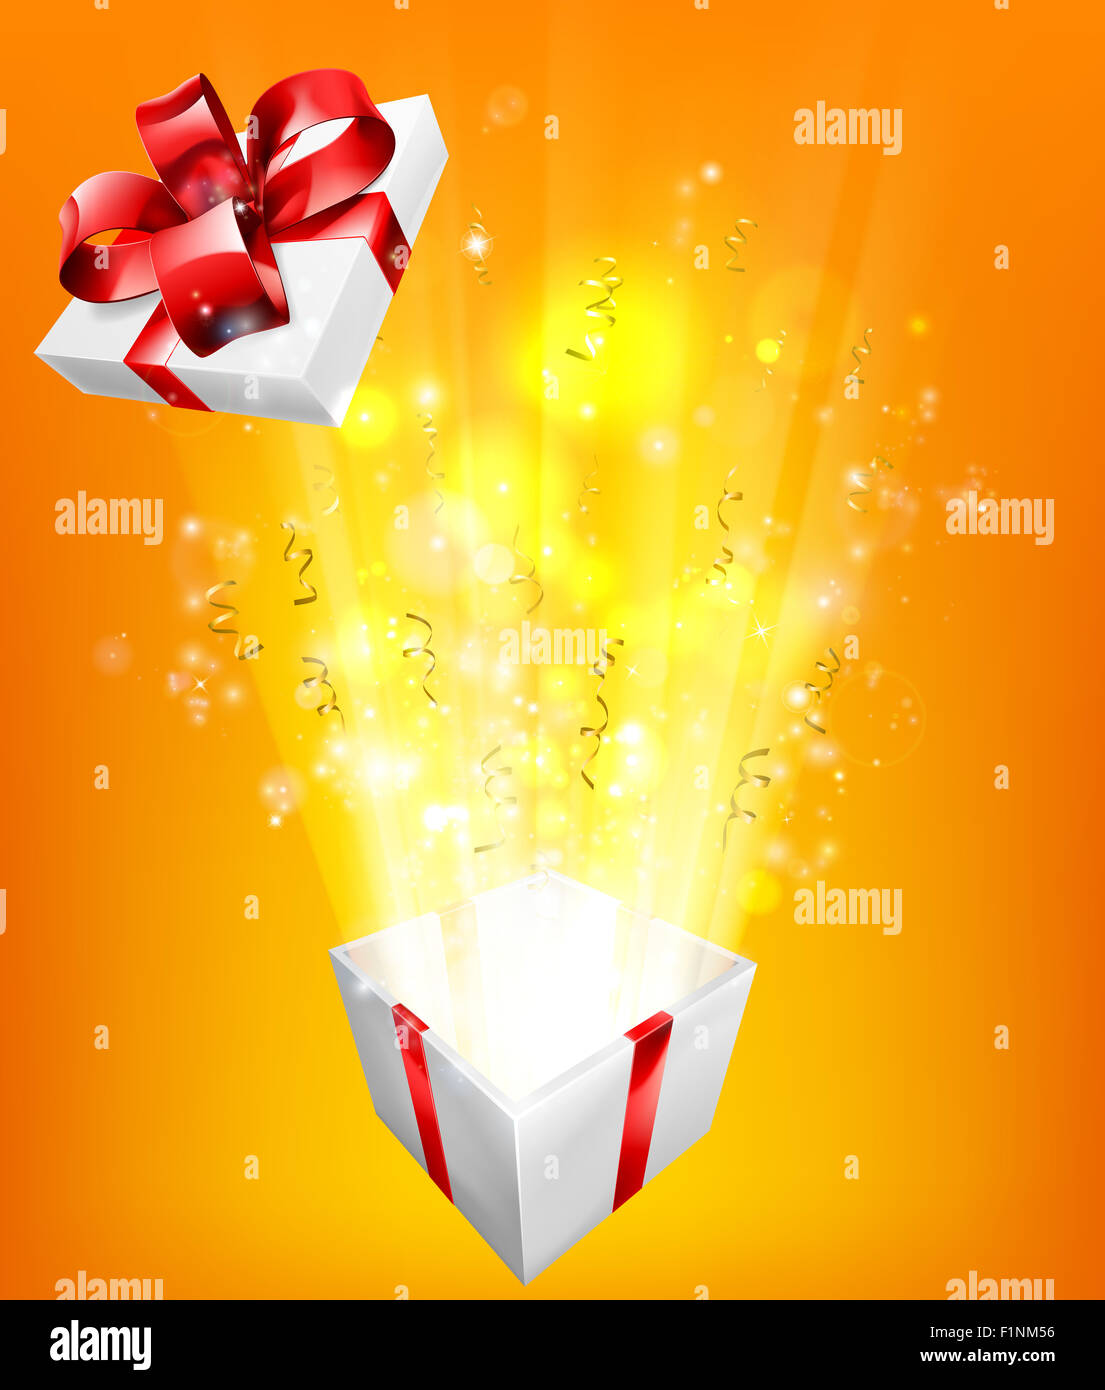 Gift box explosion concept for an exciting birthday, Christmas or other  gift or present Stock Photo - Alamy